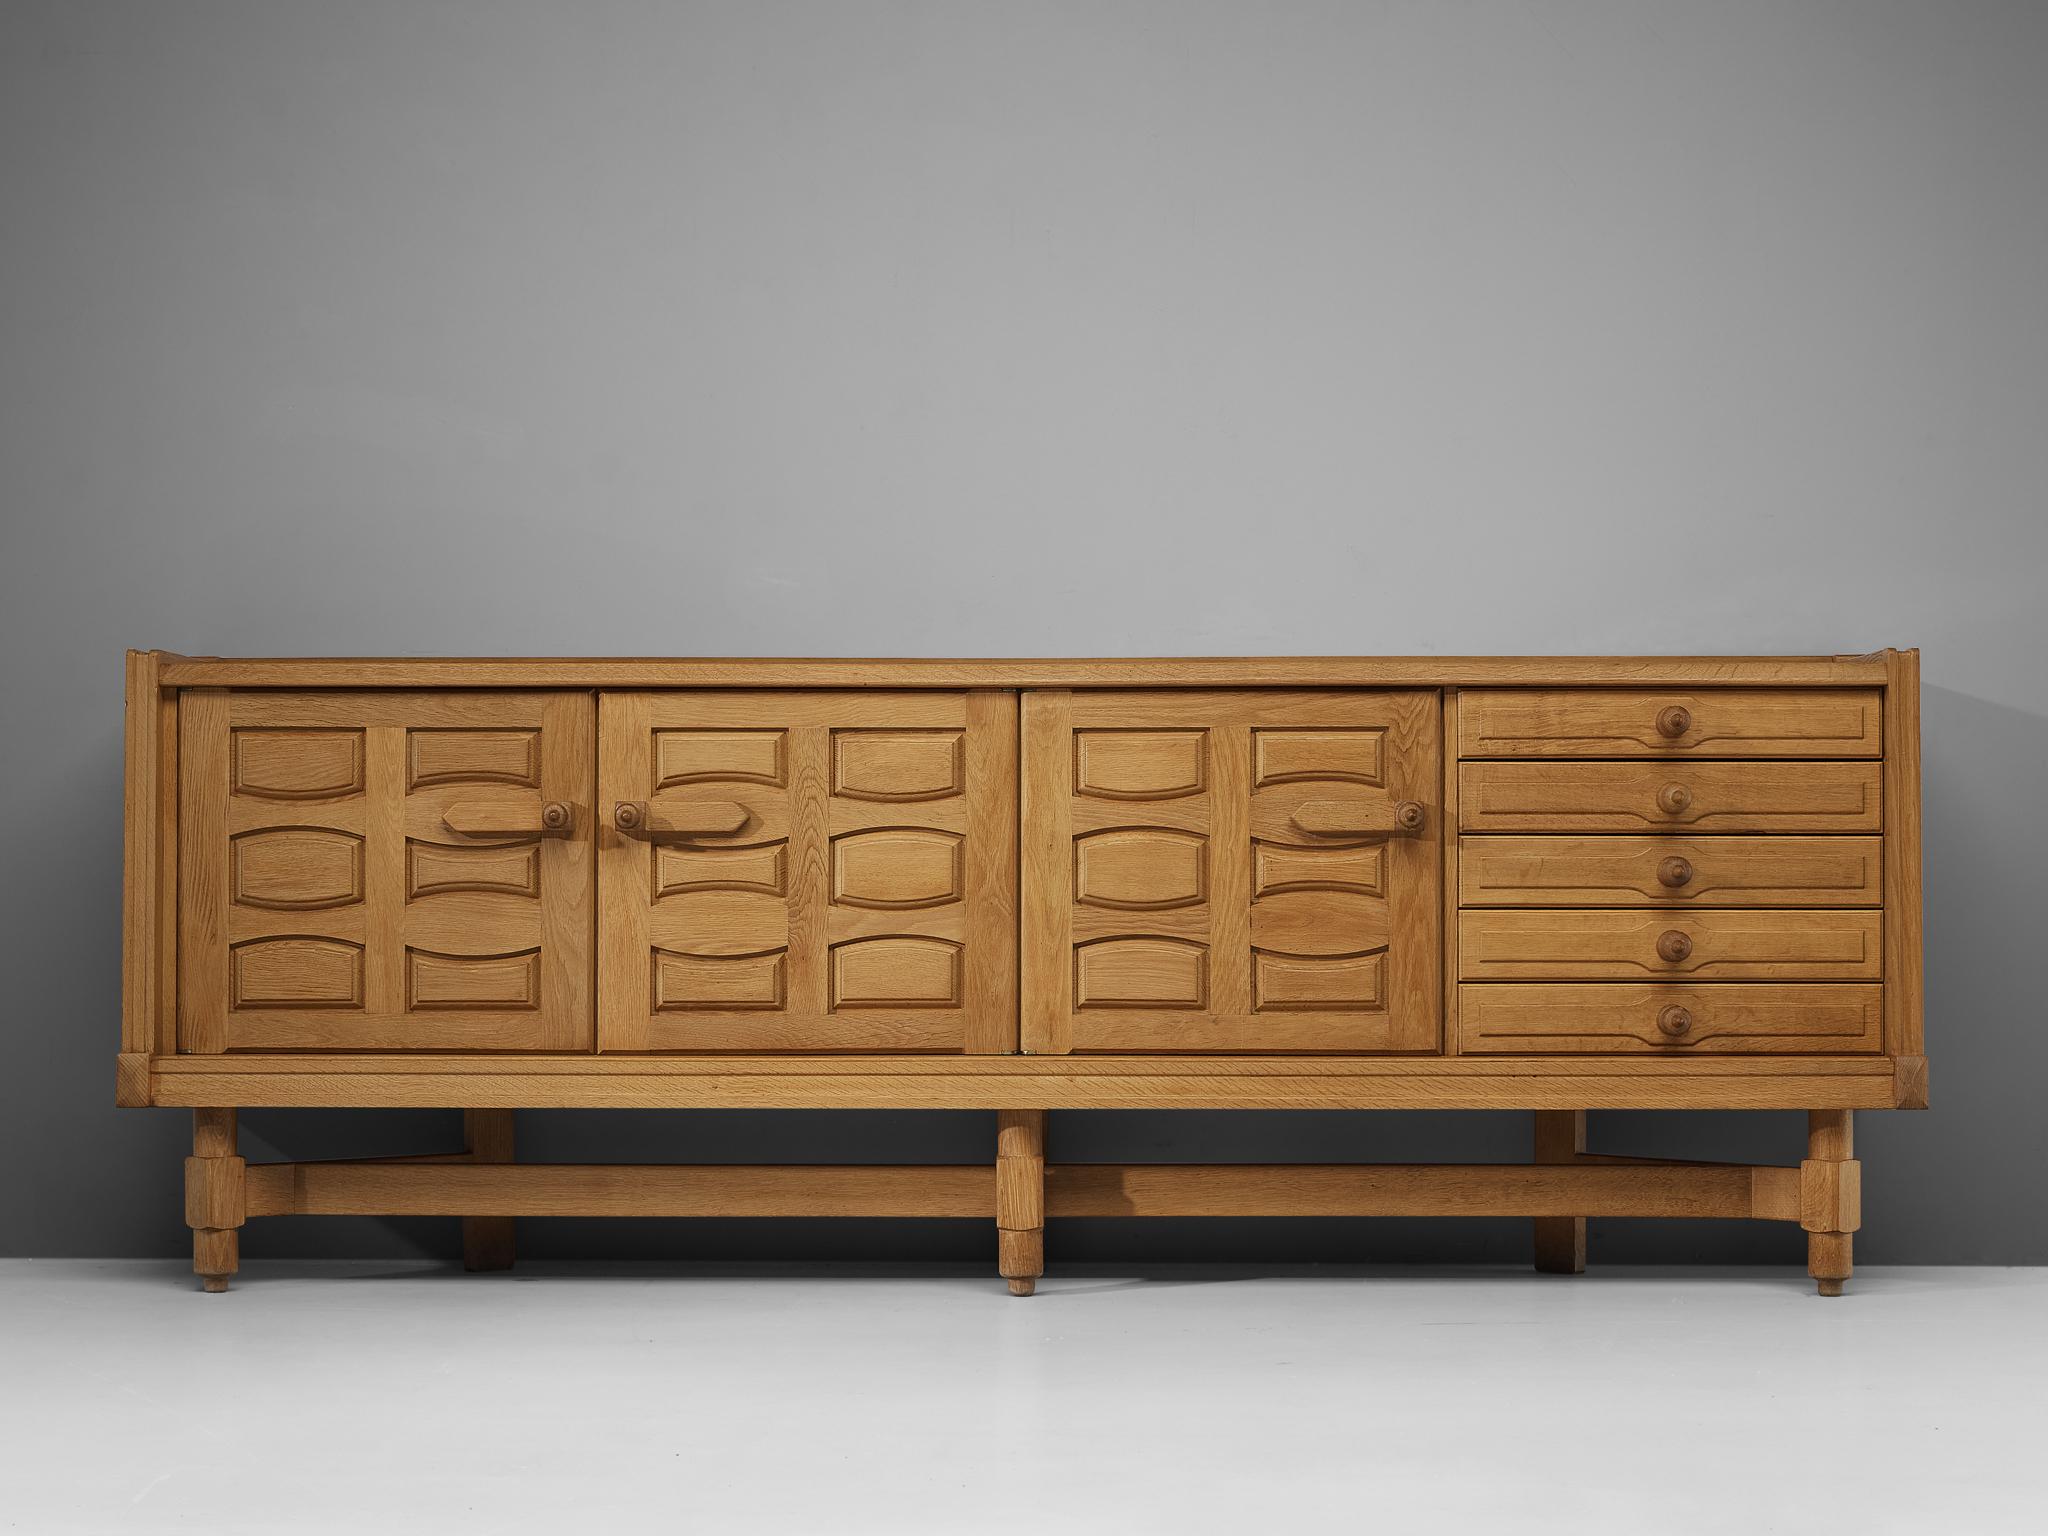 Guillerme & Chambron Sideboard in Solid Oak with Ceramic Tiles 2